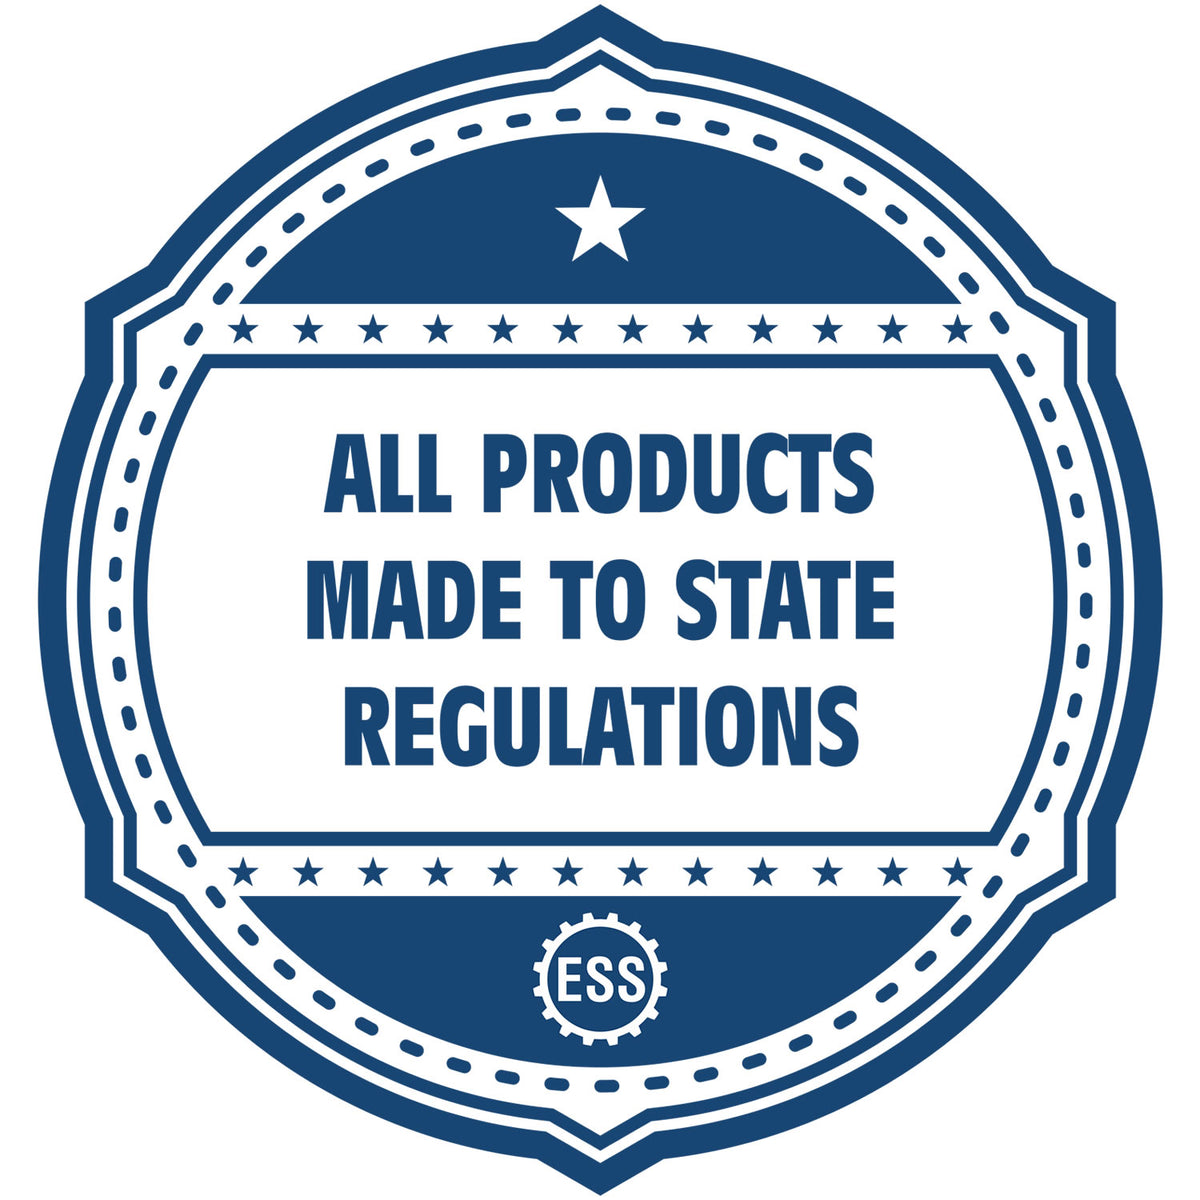 An icon or badge element for the MaxLight Premium Pre-Inked Oklahoma State Seal Notarial Stamp showing that this product is made in compliance with state regulations.